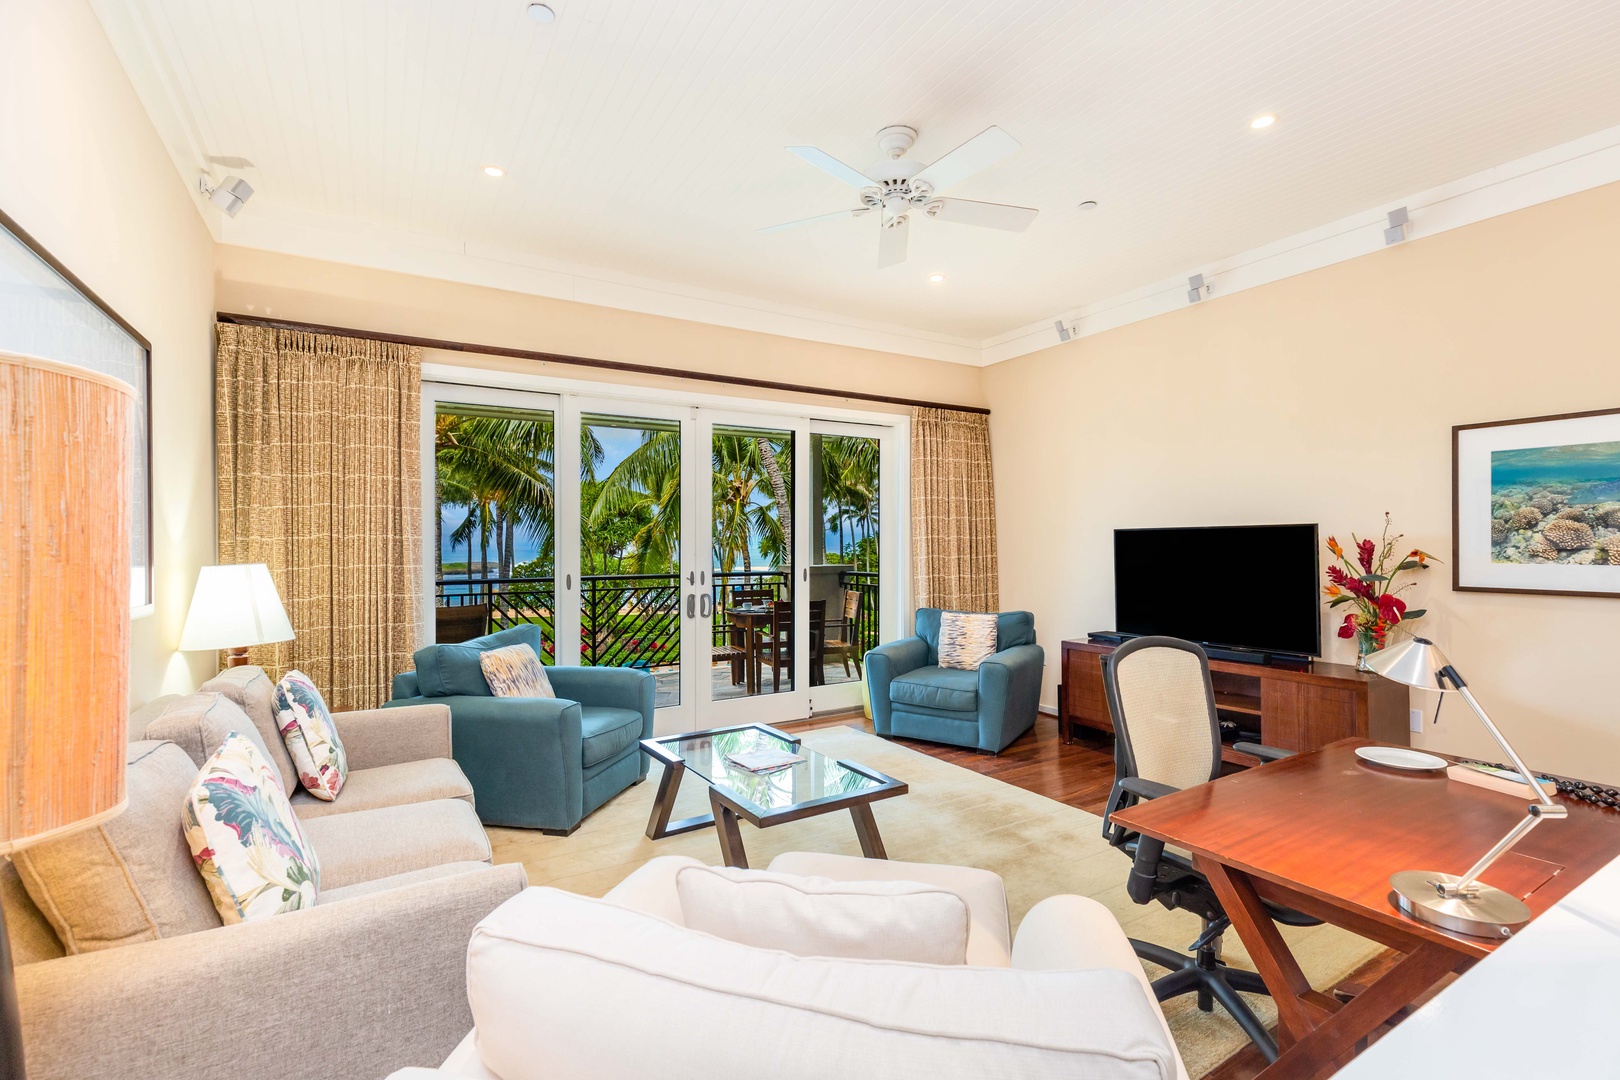 Kahuku Vacation Rentals, Turtle Bay Villas 310 - Even more gorgeous views from the comfort of your living room